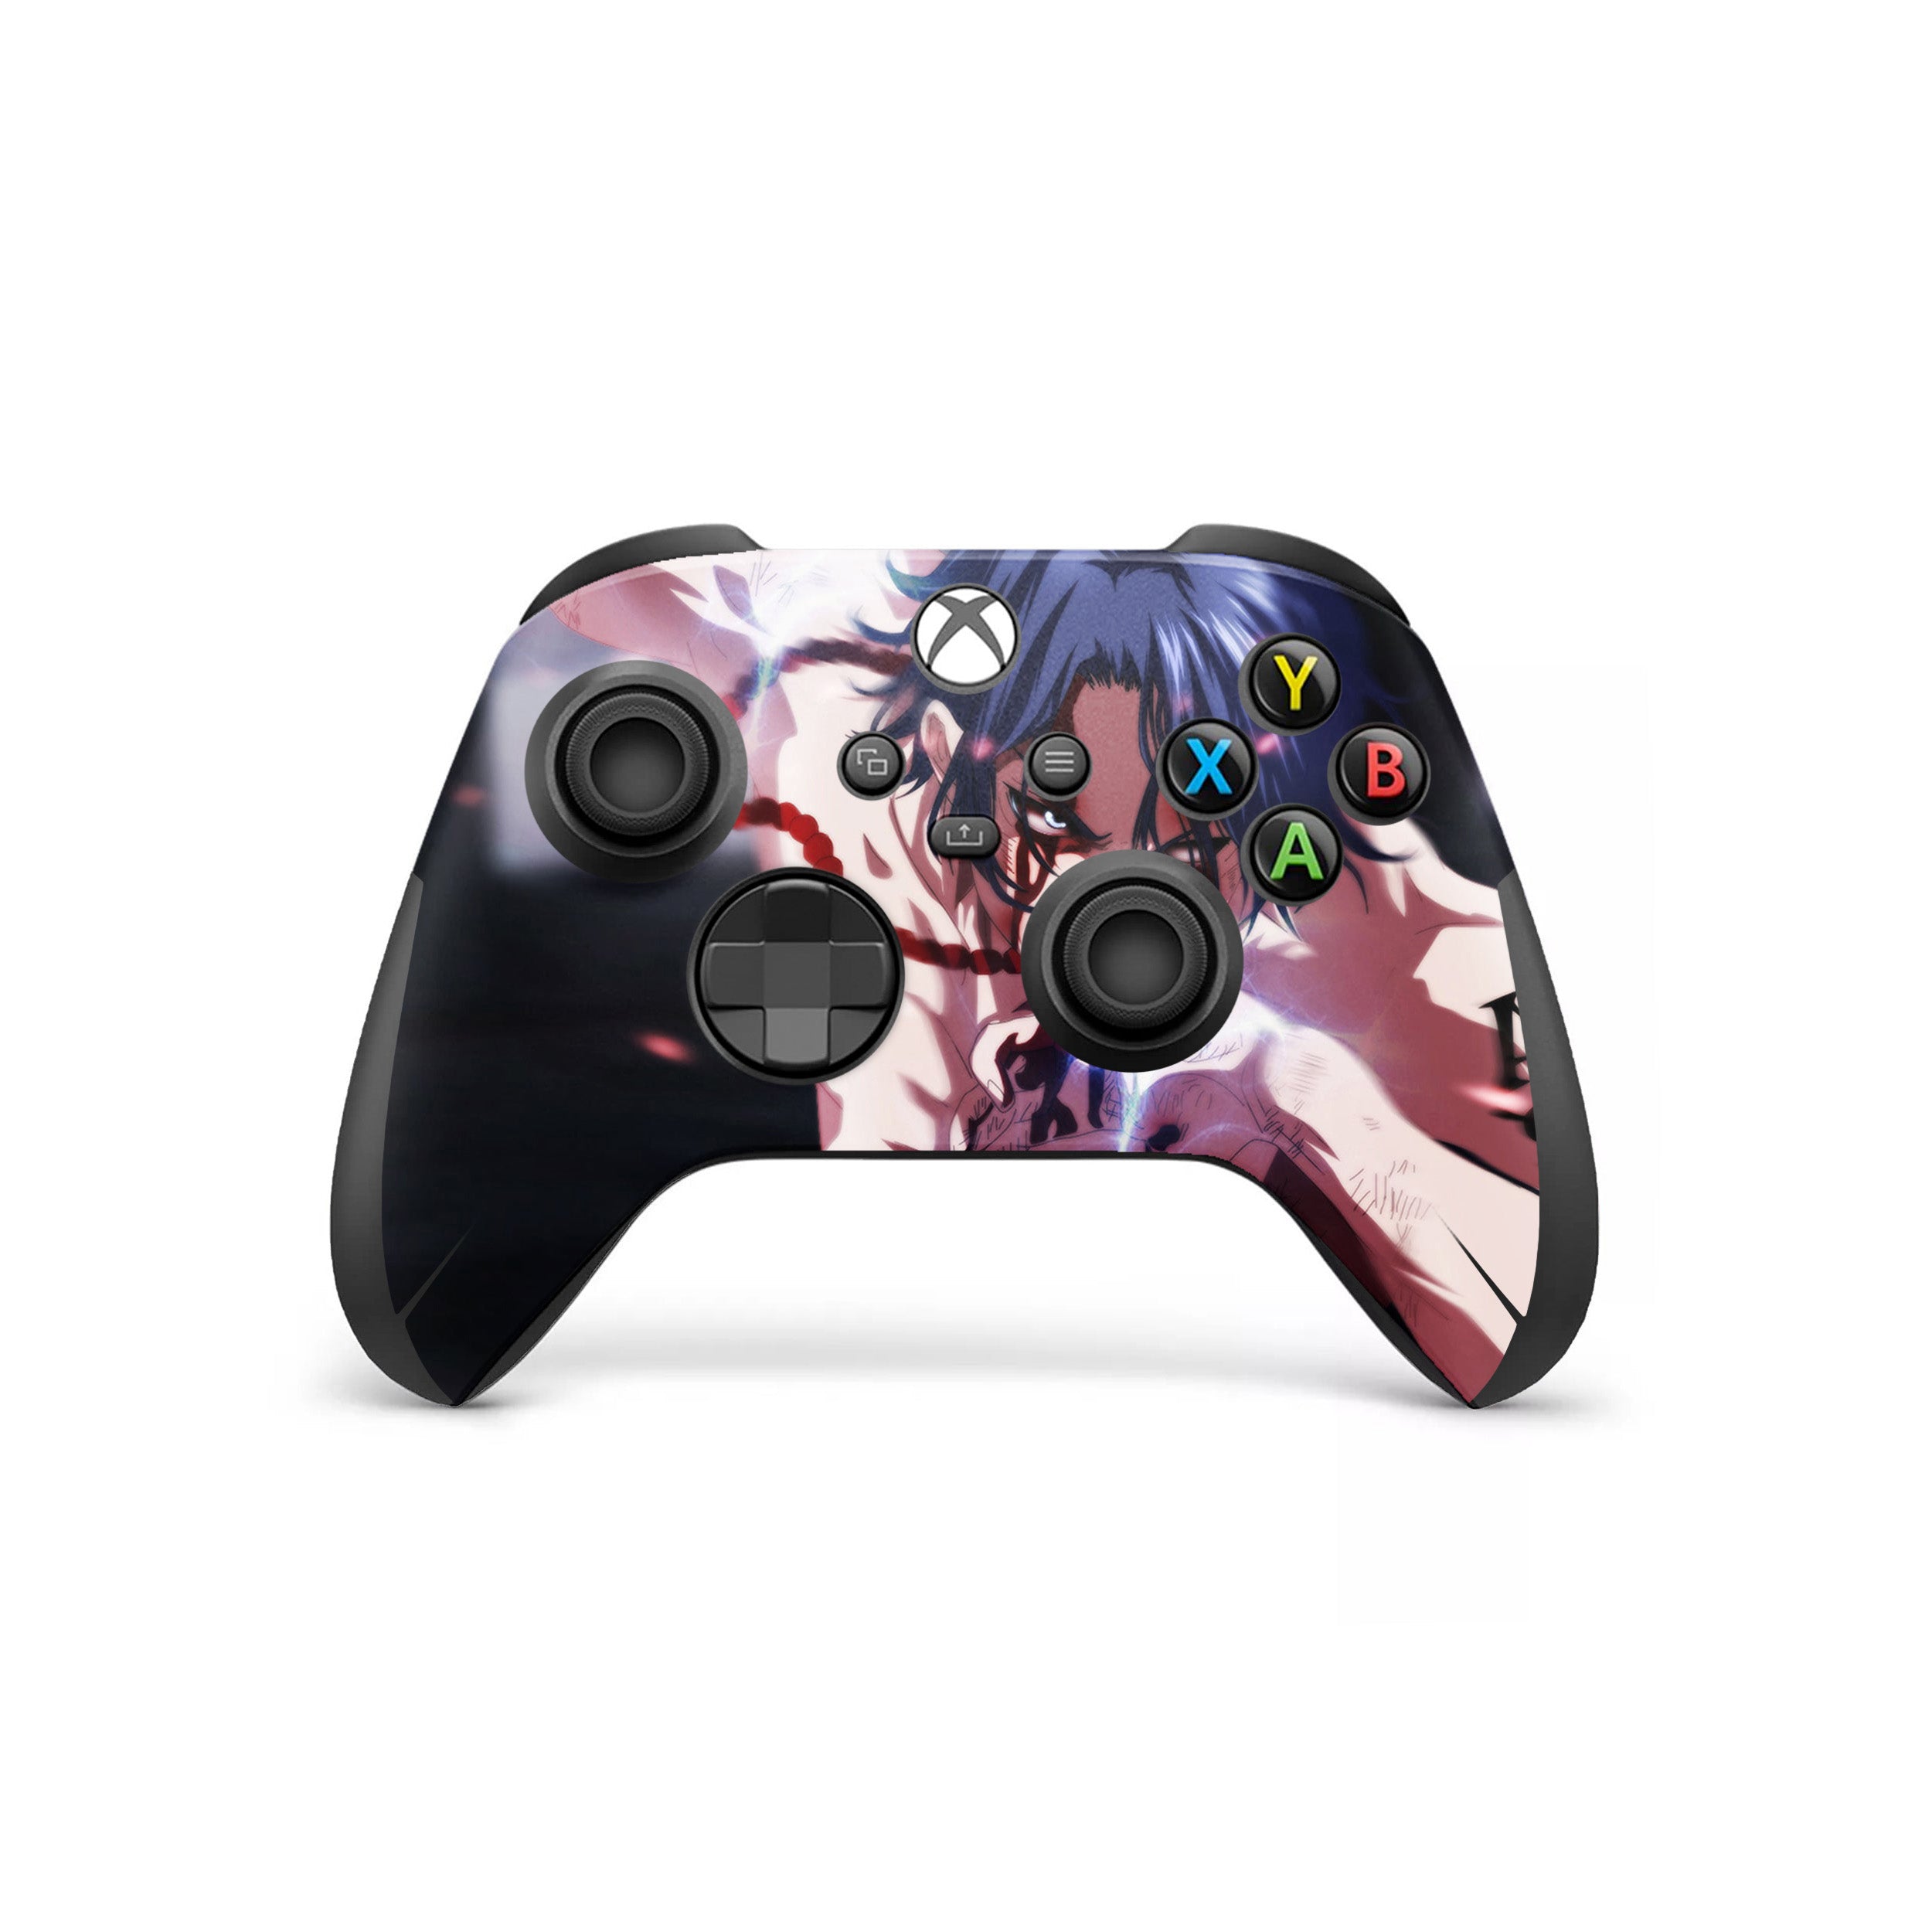 A video game skin featuring a One Piece Portgas D Ace design for the Xbox Wireless Controller.